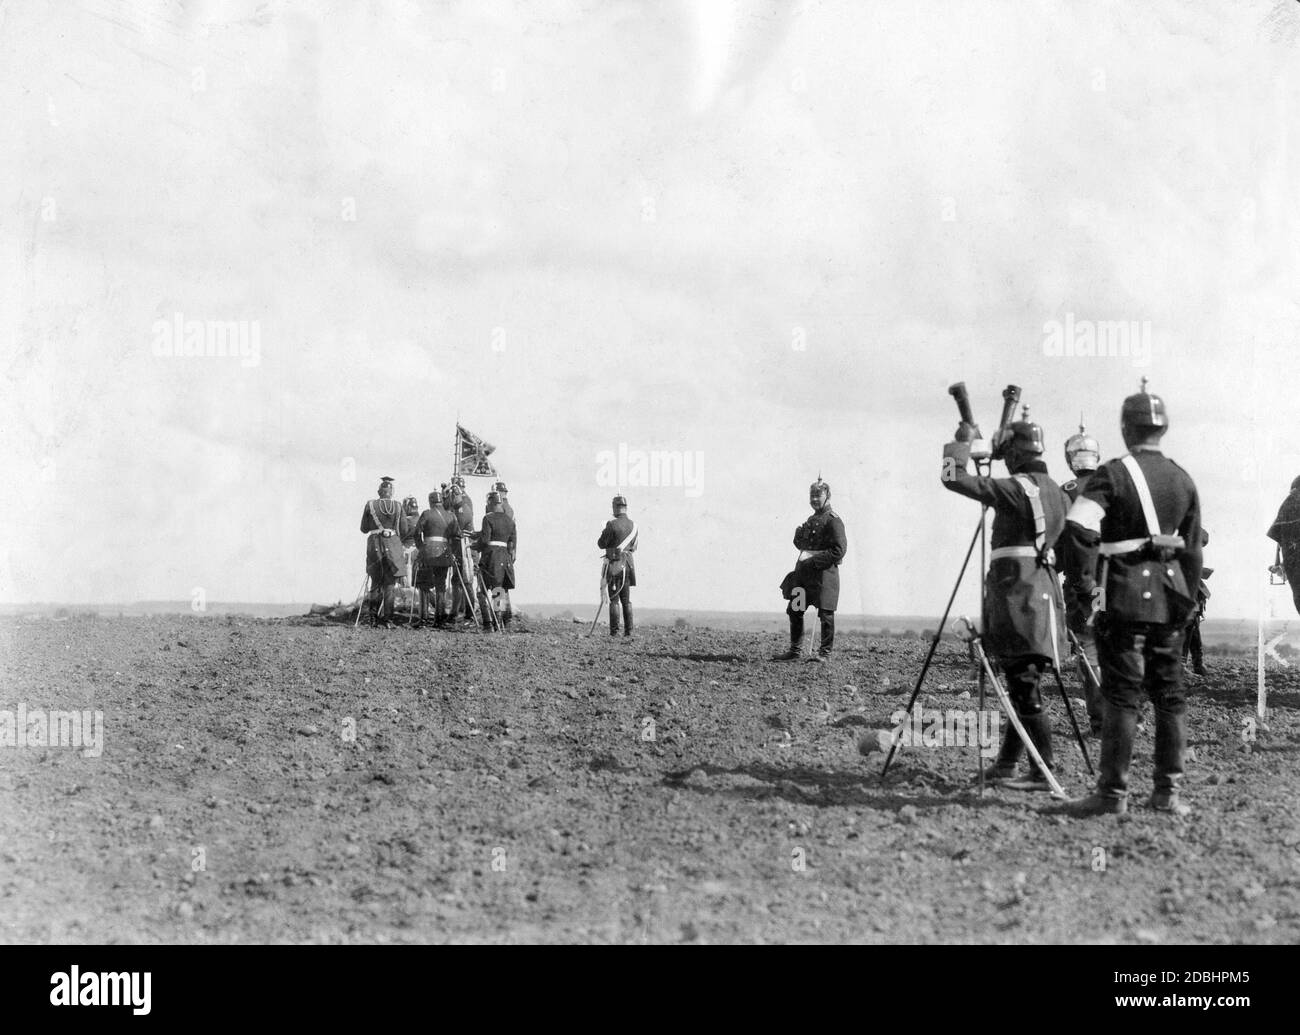 The commander's hill during the 1904 imperial manoeuvres. Emperor Wilhelm II, surrounded by his generals, prepares for the peak of the imperial manoeuvre, the great cavalry attack. This was militarily pointless, but to the delight of the Emperor it was a must at the end of every manoeuvre. Stock Photo